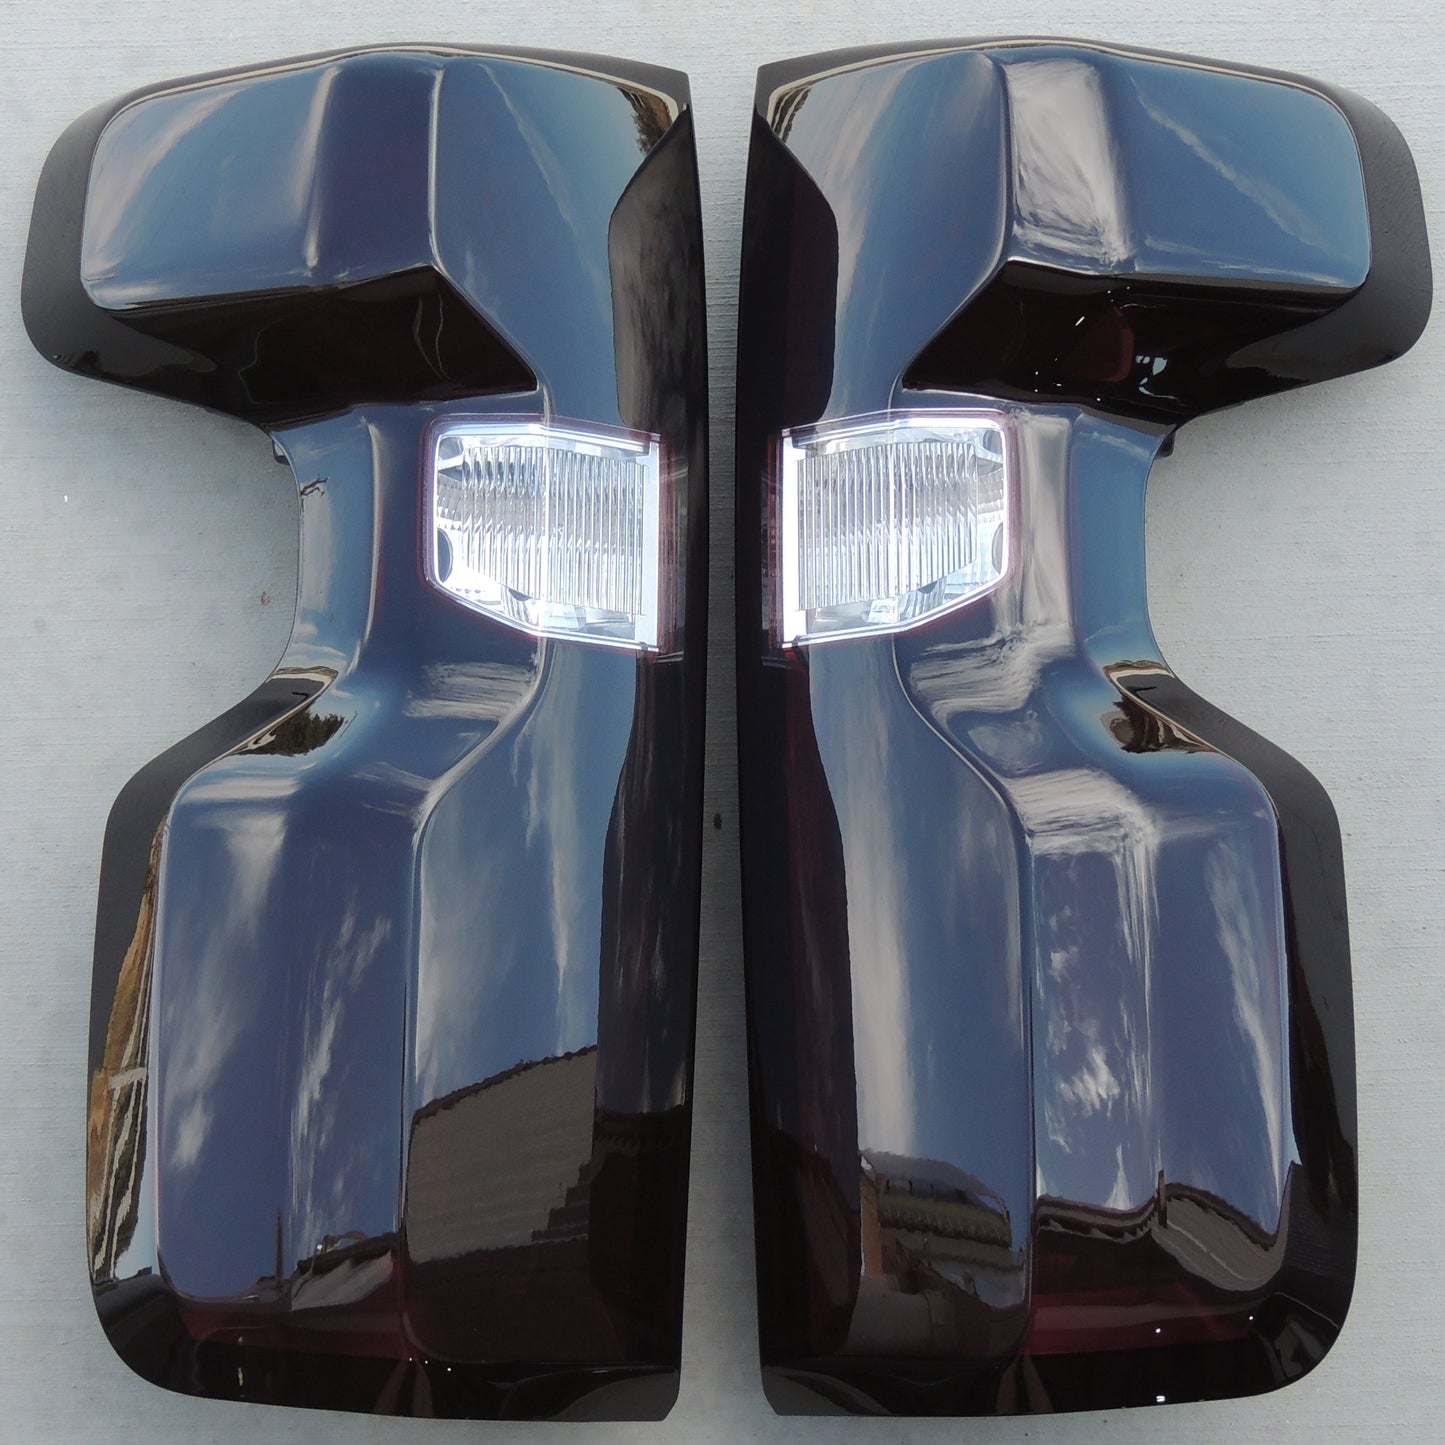 2019-2023 Chevy Silverado LED Smoked Tail Lights, REVERSE CLEAR